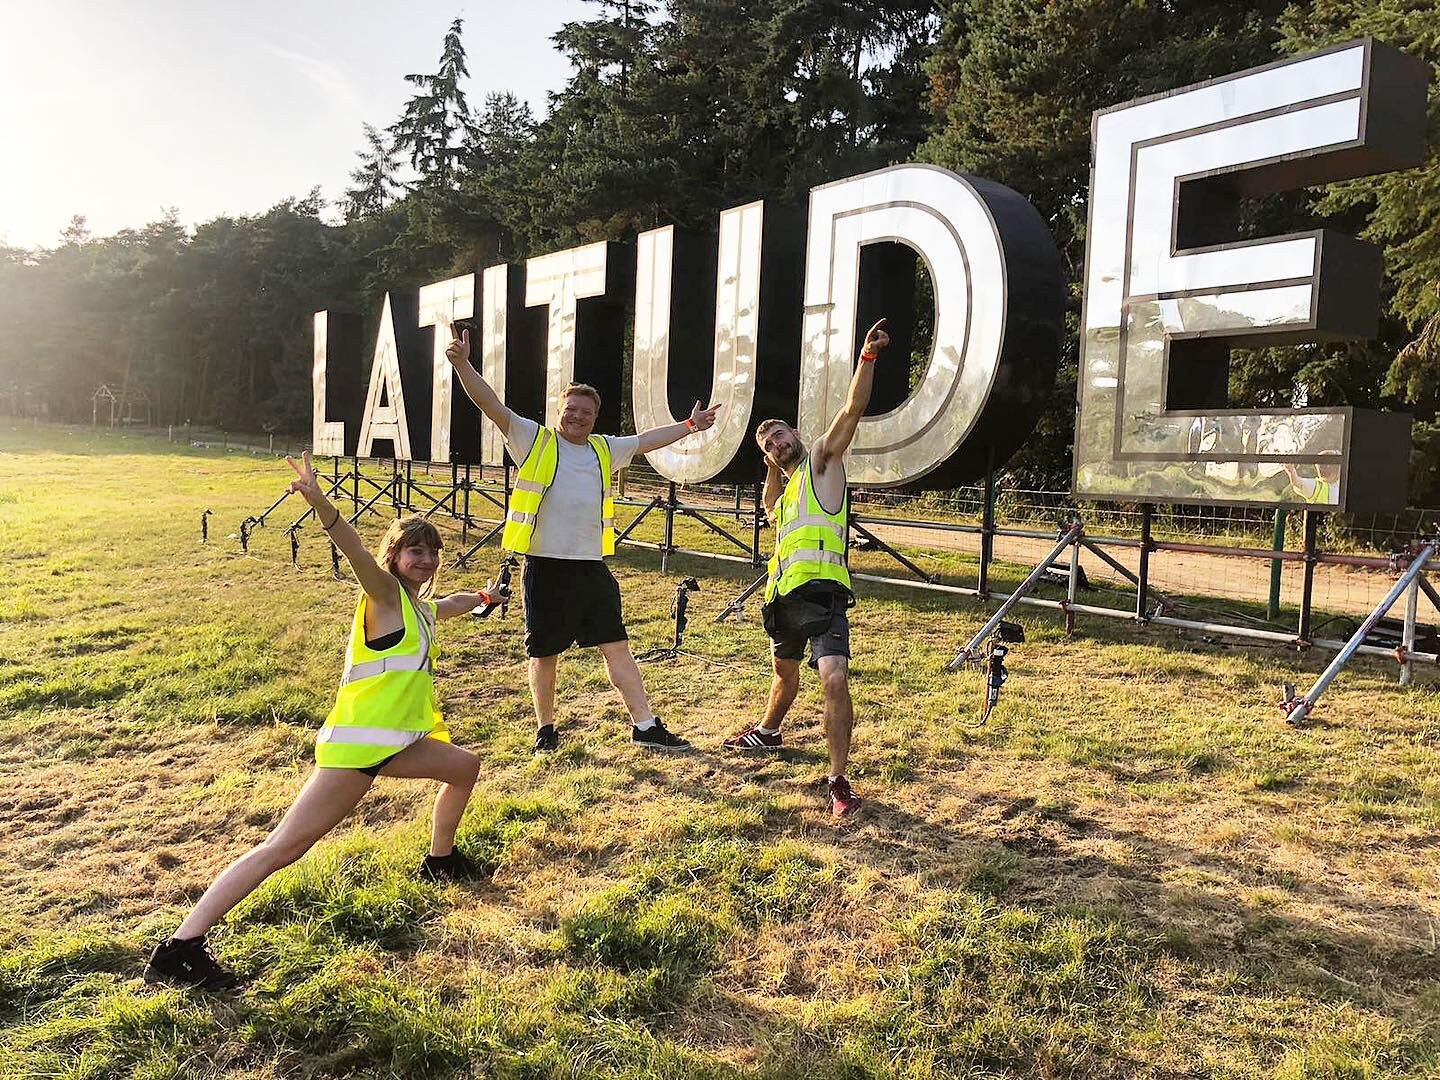 Stretching those legs after a long car ride up to sunny Suffolk! 

Find us in Latitude Luxury this weekend, featuring our friends at @donnellysrestaurant 🍽🍾☀️